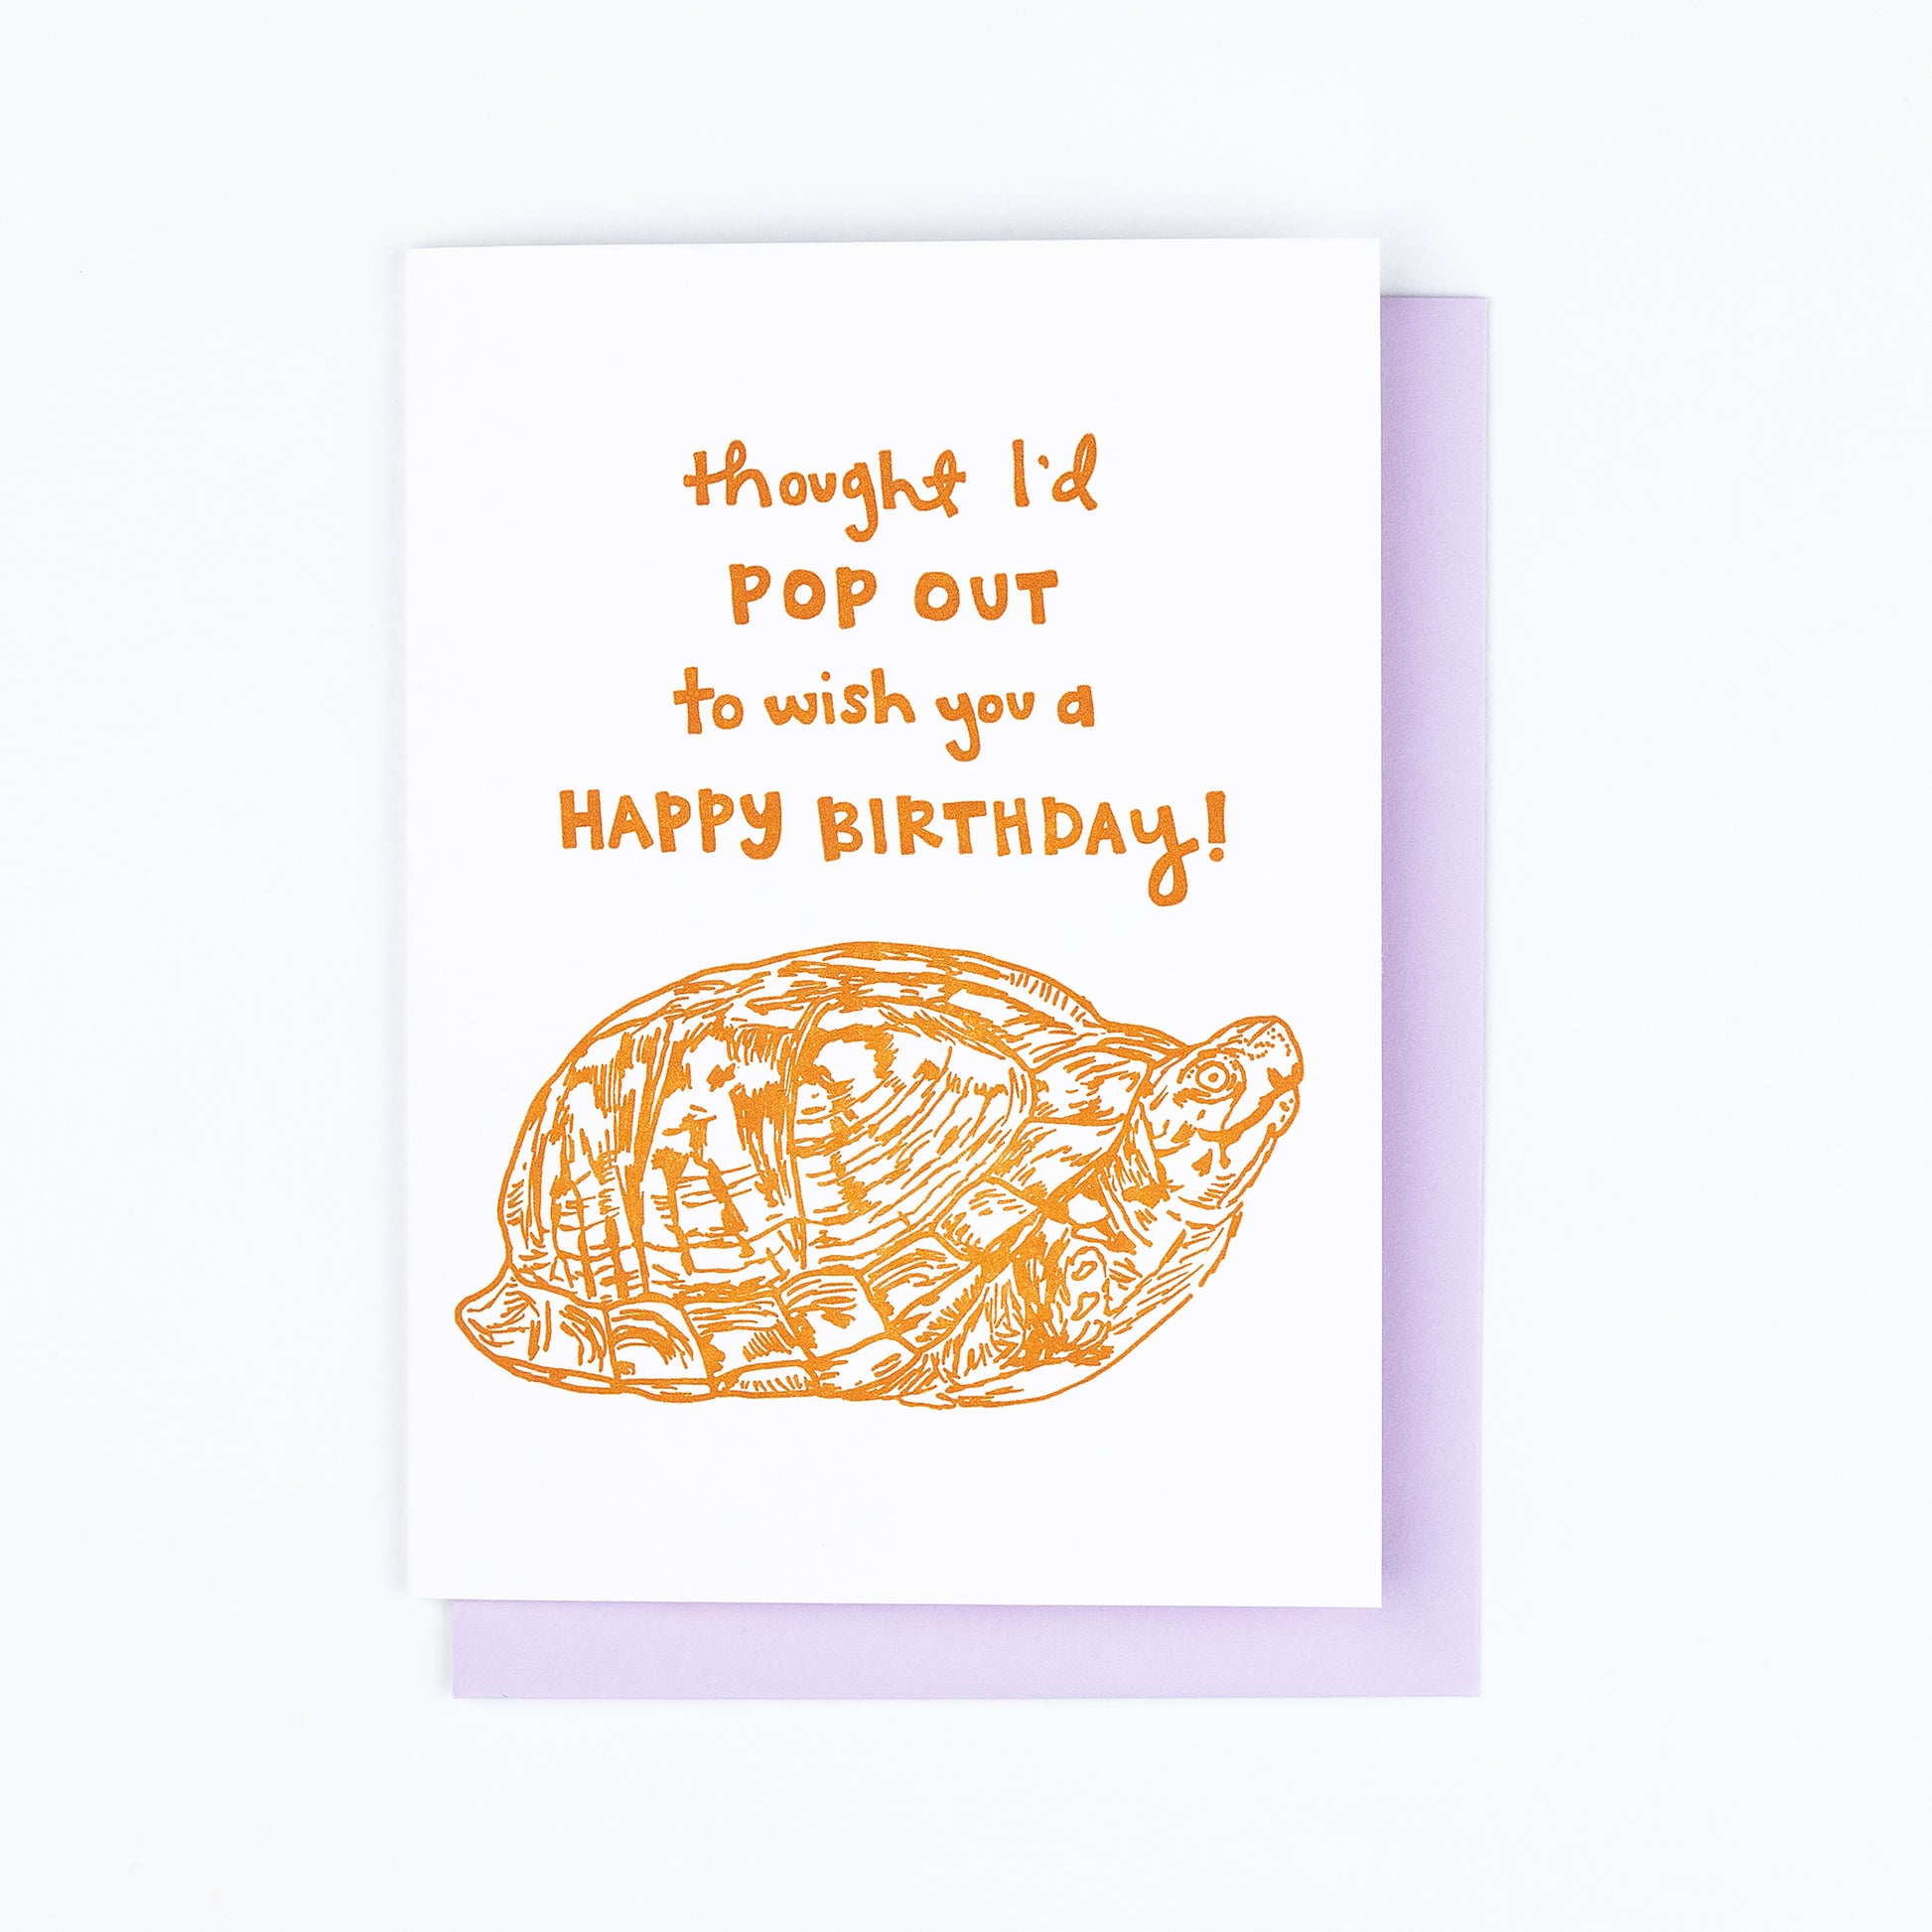 Letterpress greeting card featuring a hand-drawn Appalachian Box Turtle printed in a vibrant dark orange ink. "Thought I'd pop out to wish you a Happy Birthday!" is written on the top of the card in a whimsical hand-drawn text, in the same orange ink. The card is white, blank inside, and is paired with a lilac purple envelope.